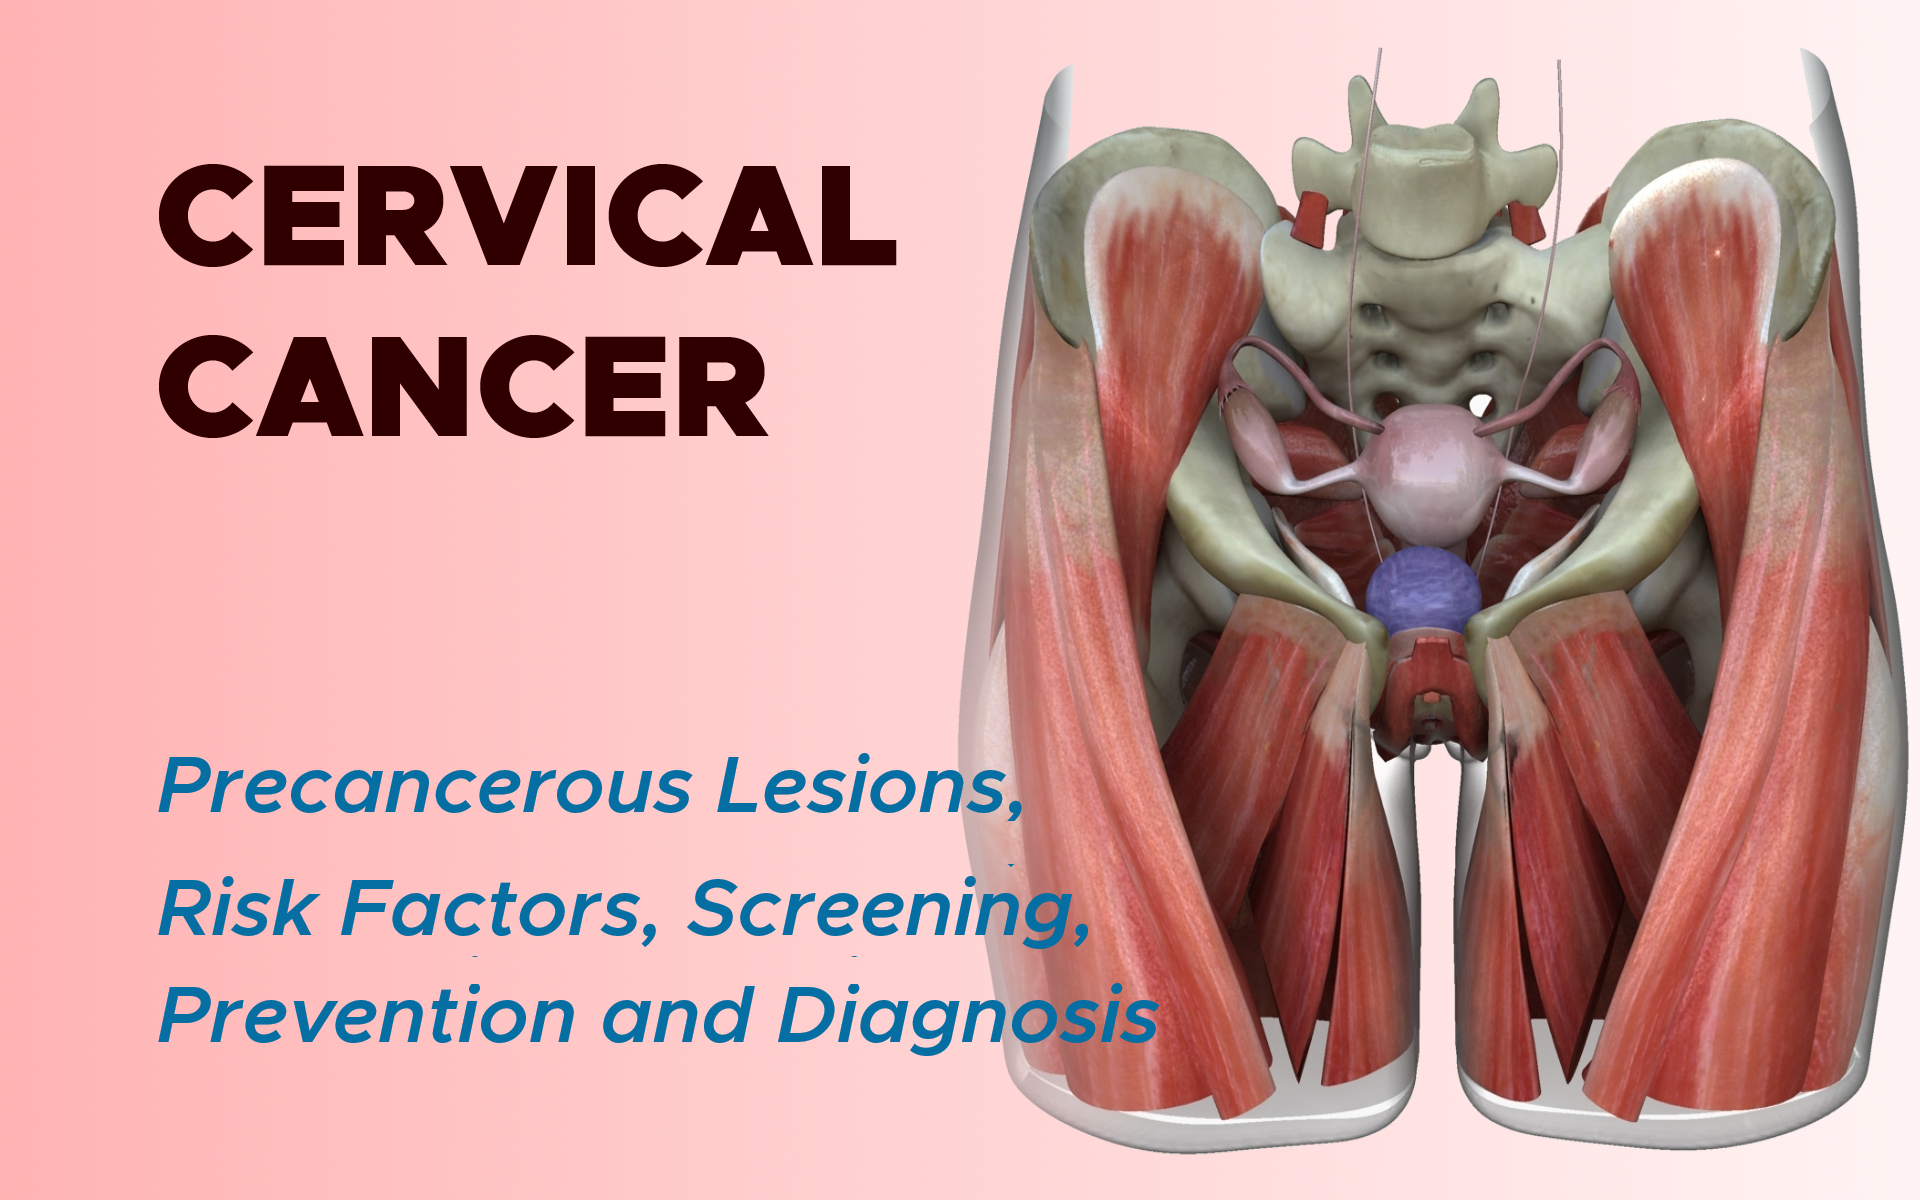 Cervical Cancer: Risk Factors, Screening, Prevention and Diagnosis